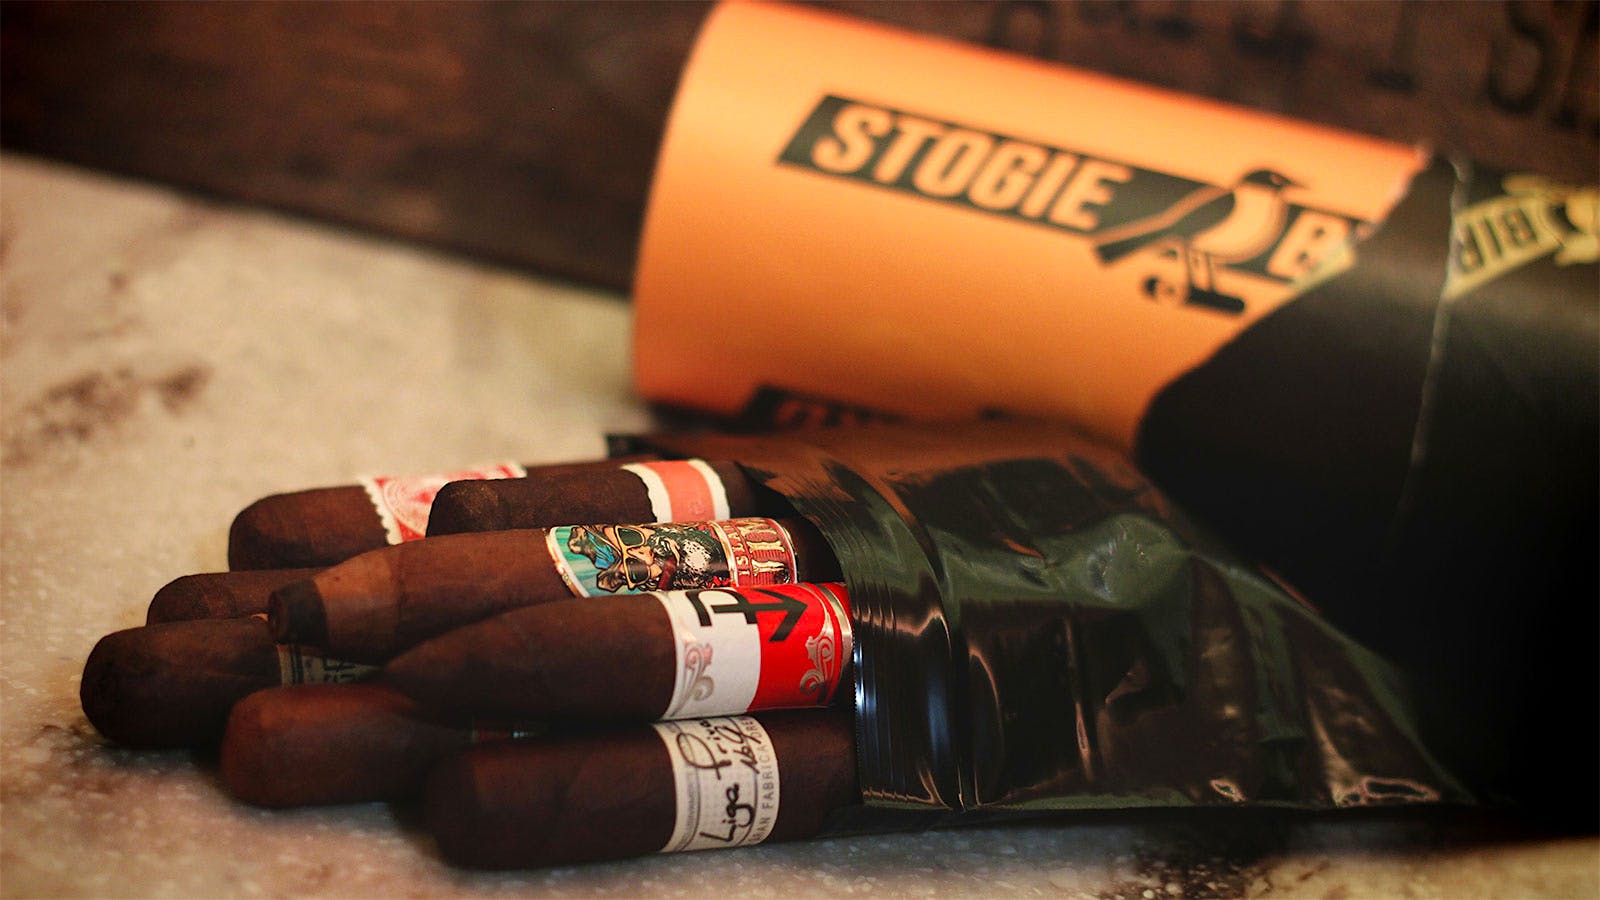 A selection of cigars from Stogiebird.